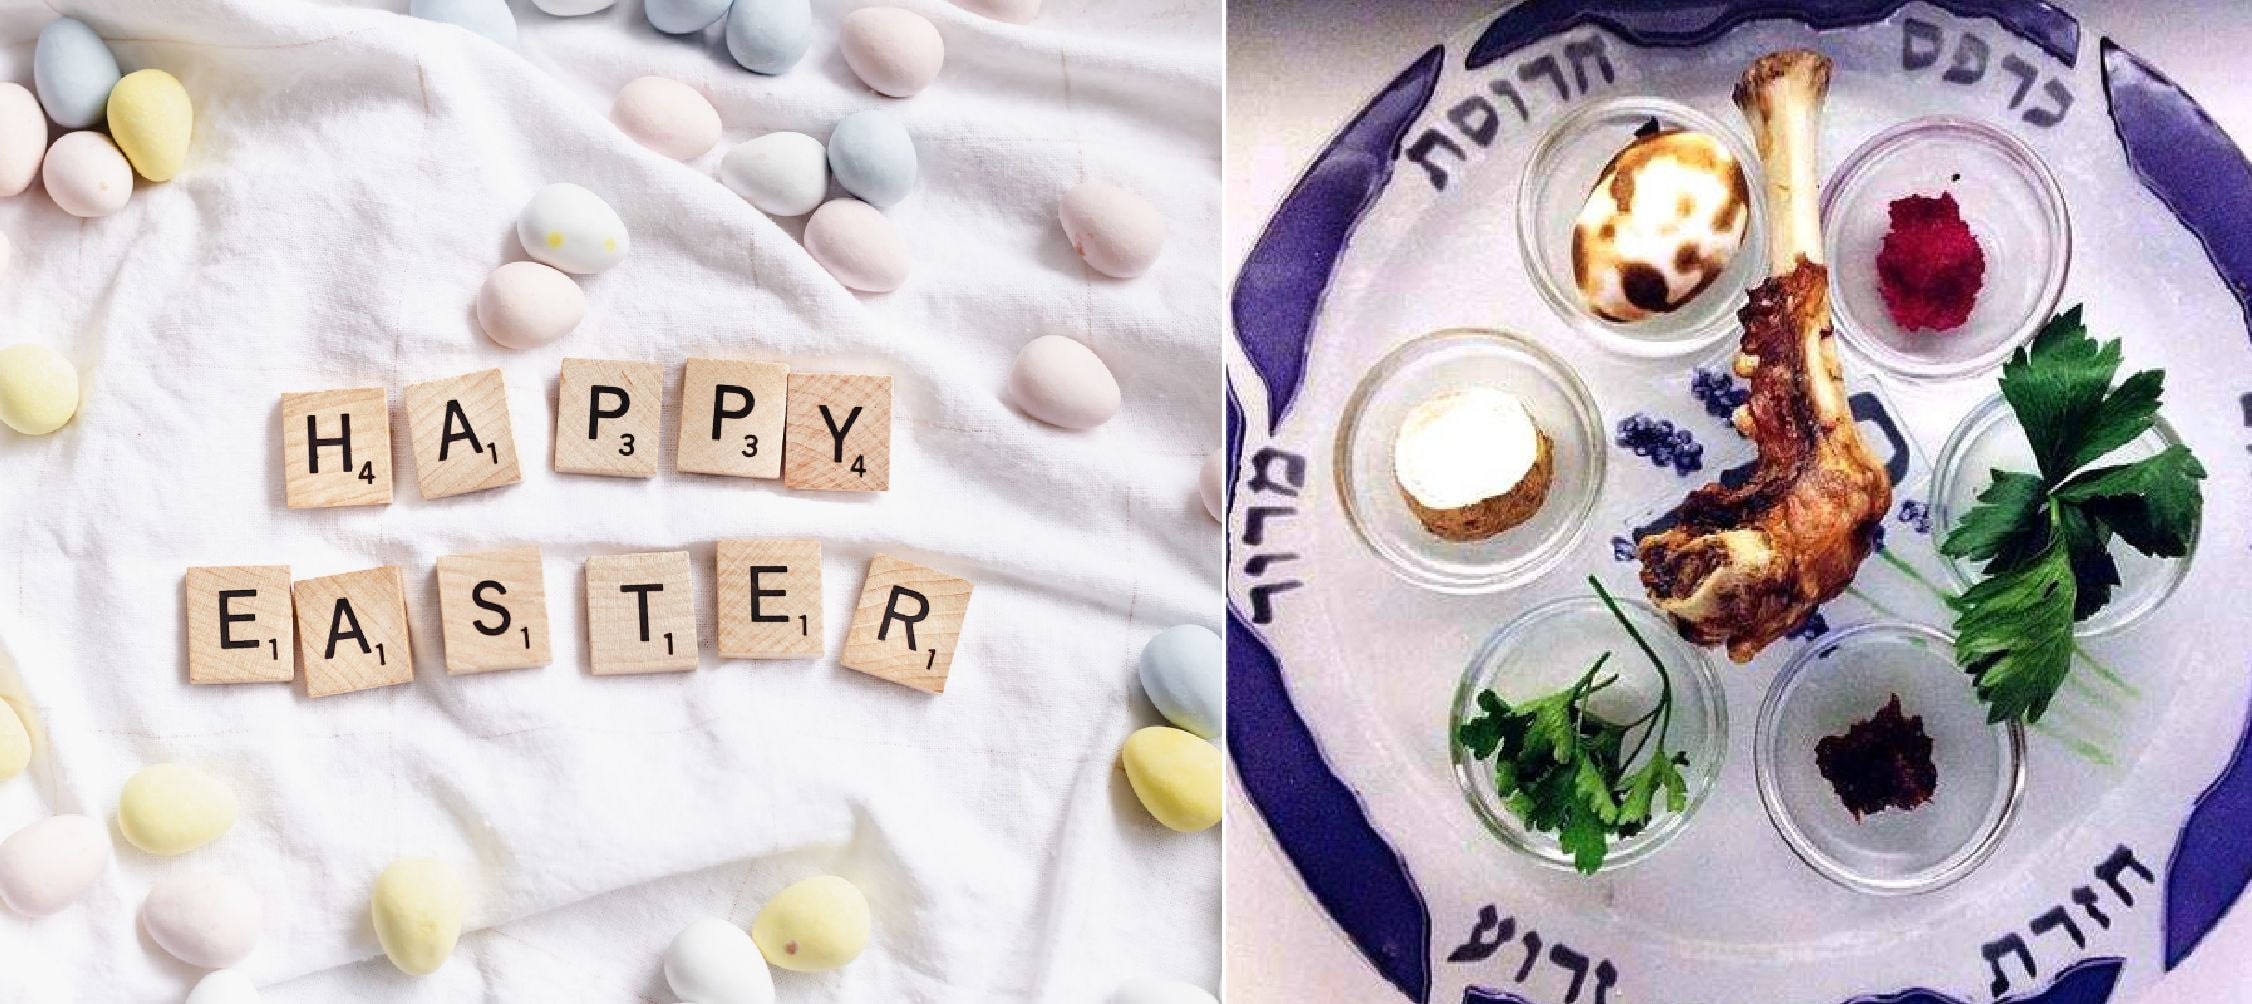 Los Angeles Celebrates Easter and Passover